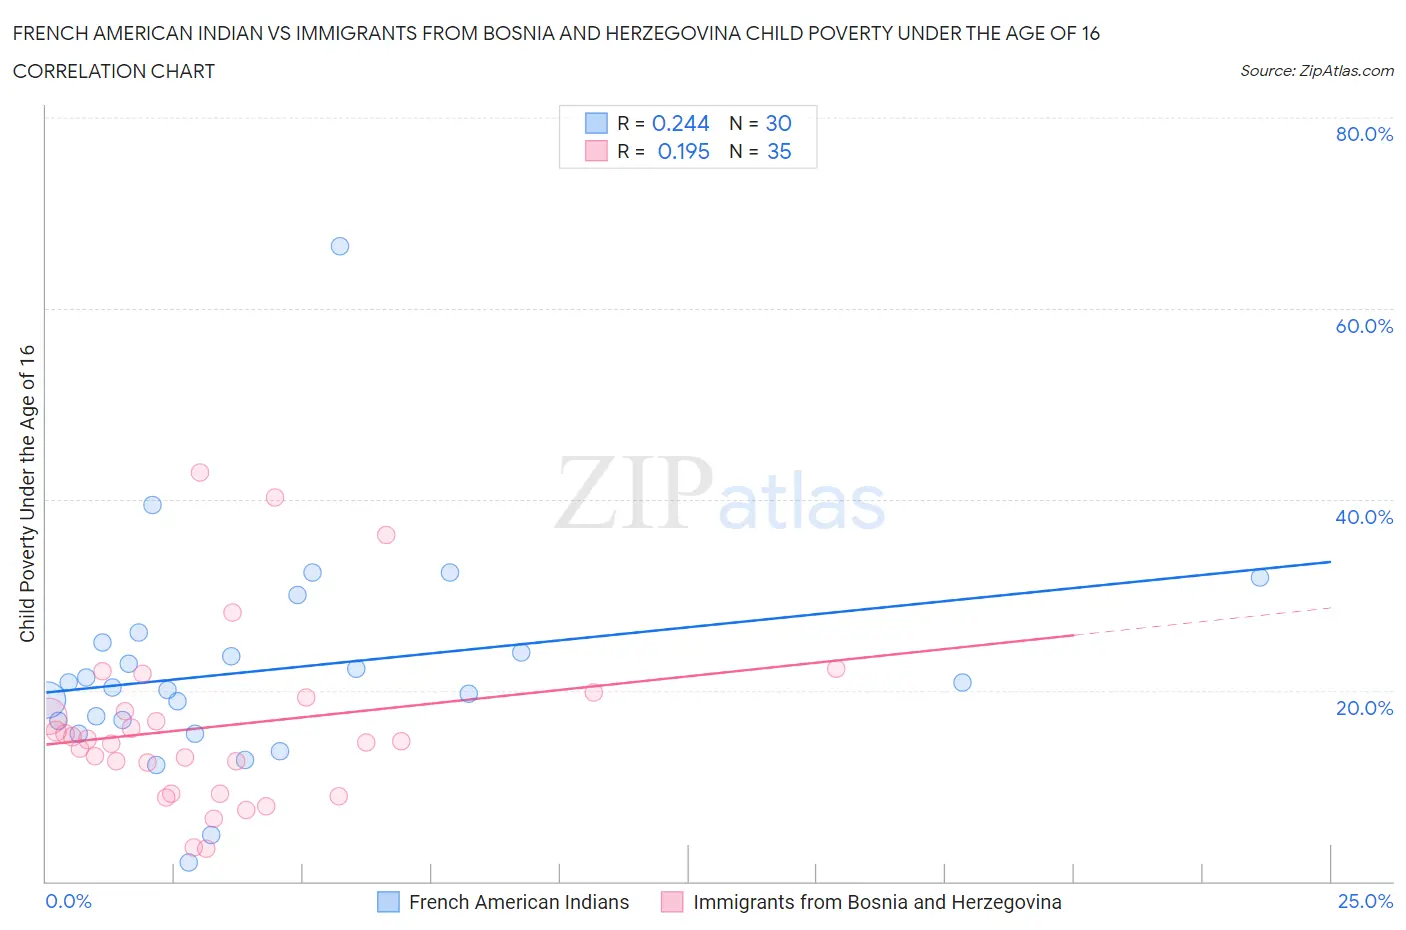 French American Indian vs Immigrants from Bosnia and Herzegovina Child Poverty Under the Age of 16